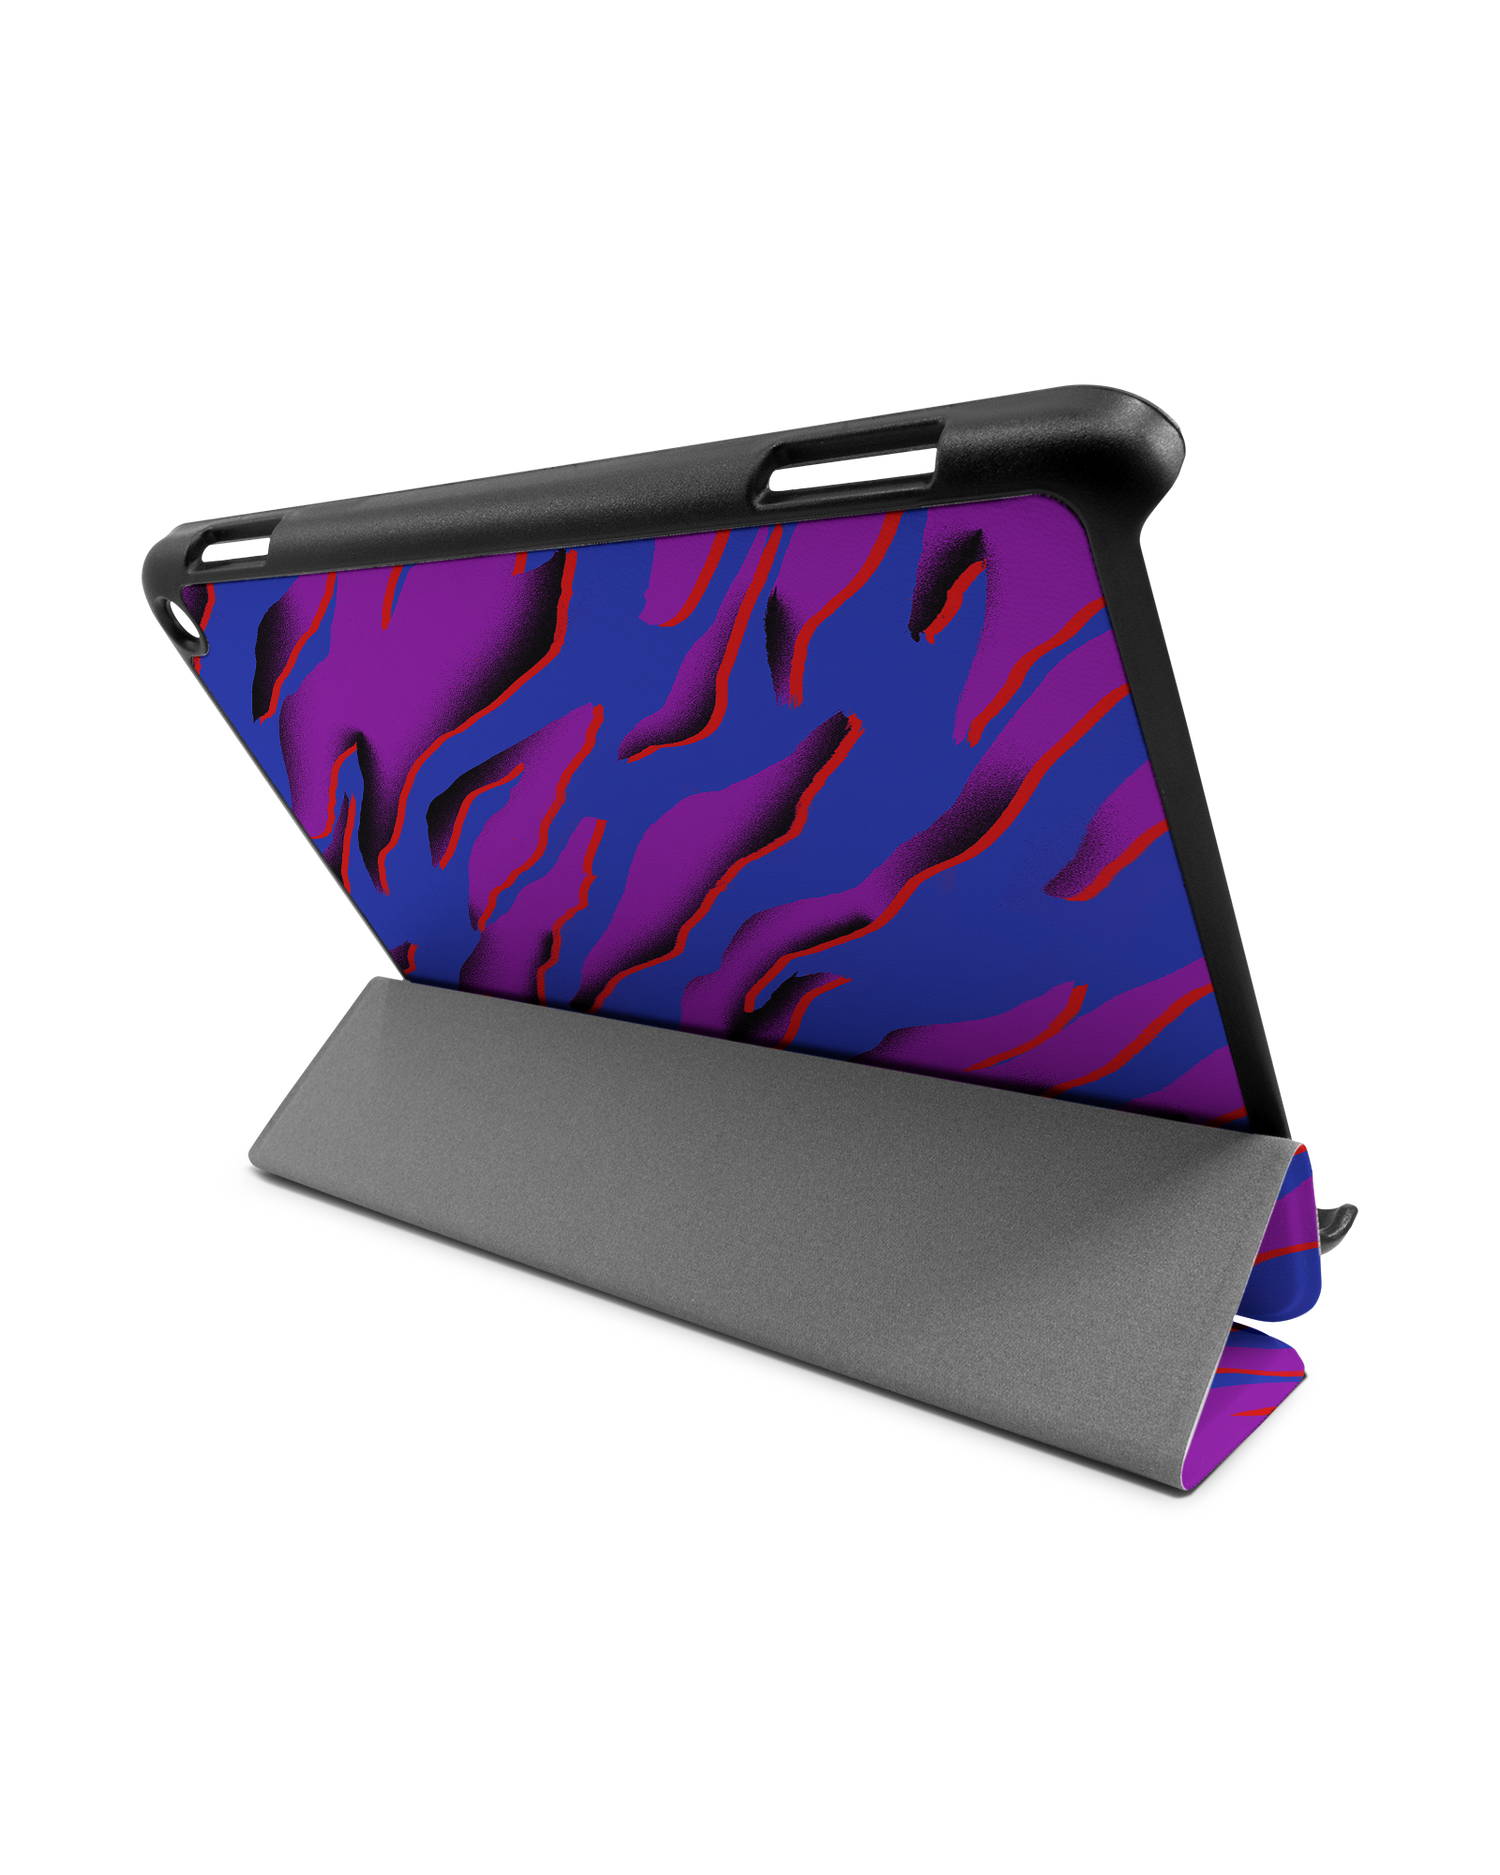 Electric Ocean 2 Tablet Smart Case for Amazon Fire HD 8 (2022), Amazon Fire HD 8 Plus (2022), Amazon Fire HD 8 (2020), Amazon Fire HD 8 Plus (2020): Used as Stand